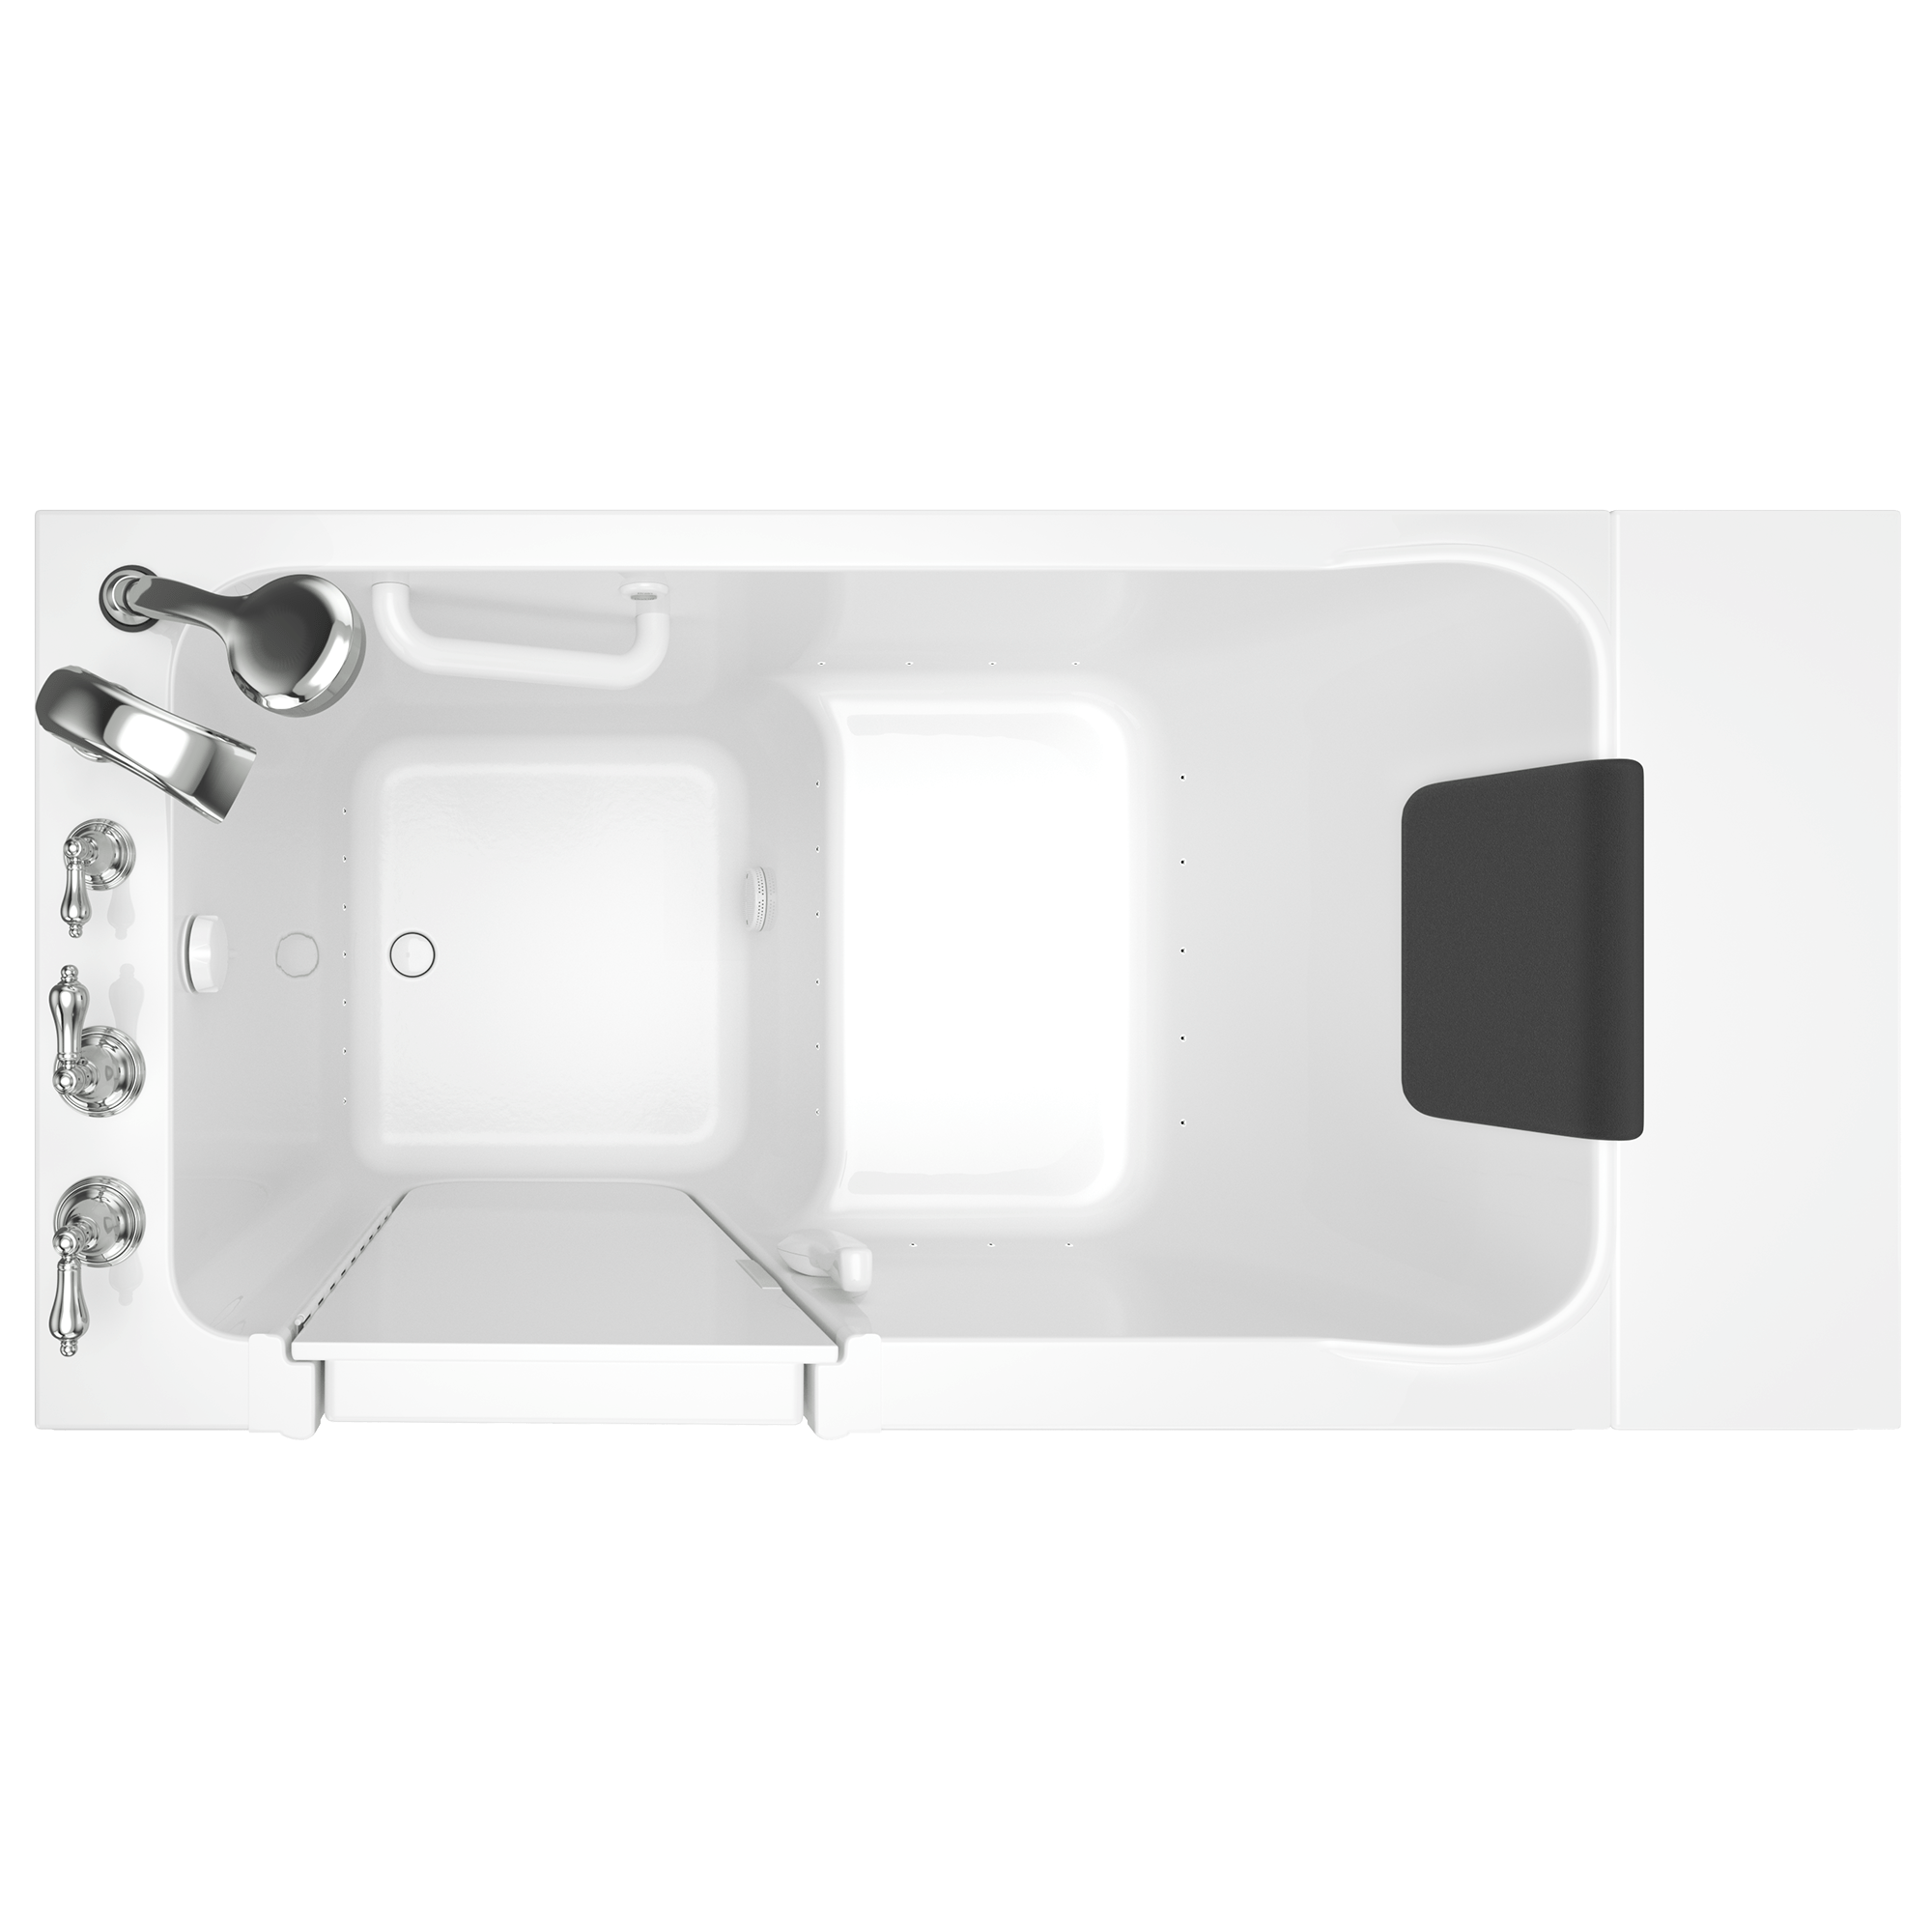 Acrylic Luxury Series 30 x 51  Inch Walk in Tub With Air Spa System   Left Hand Drain With Faucet WIB WHITE